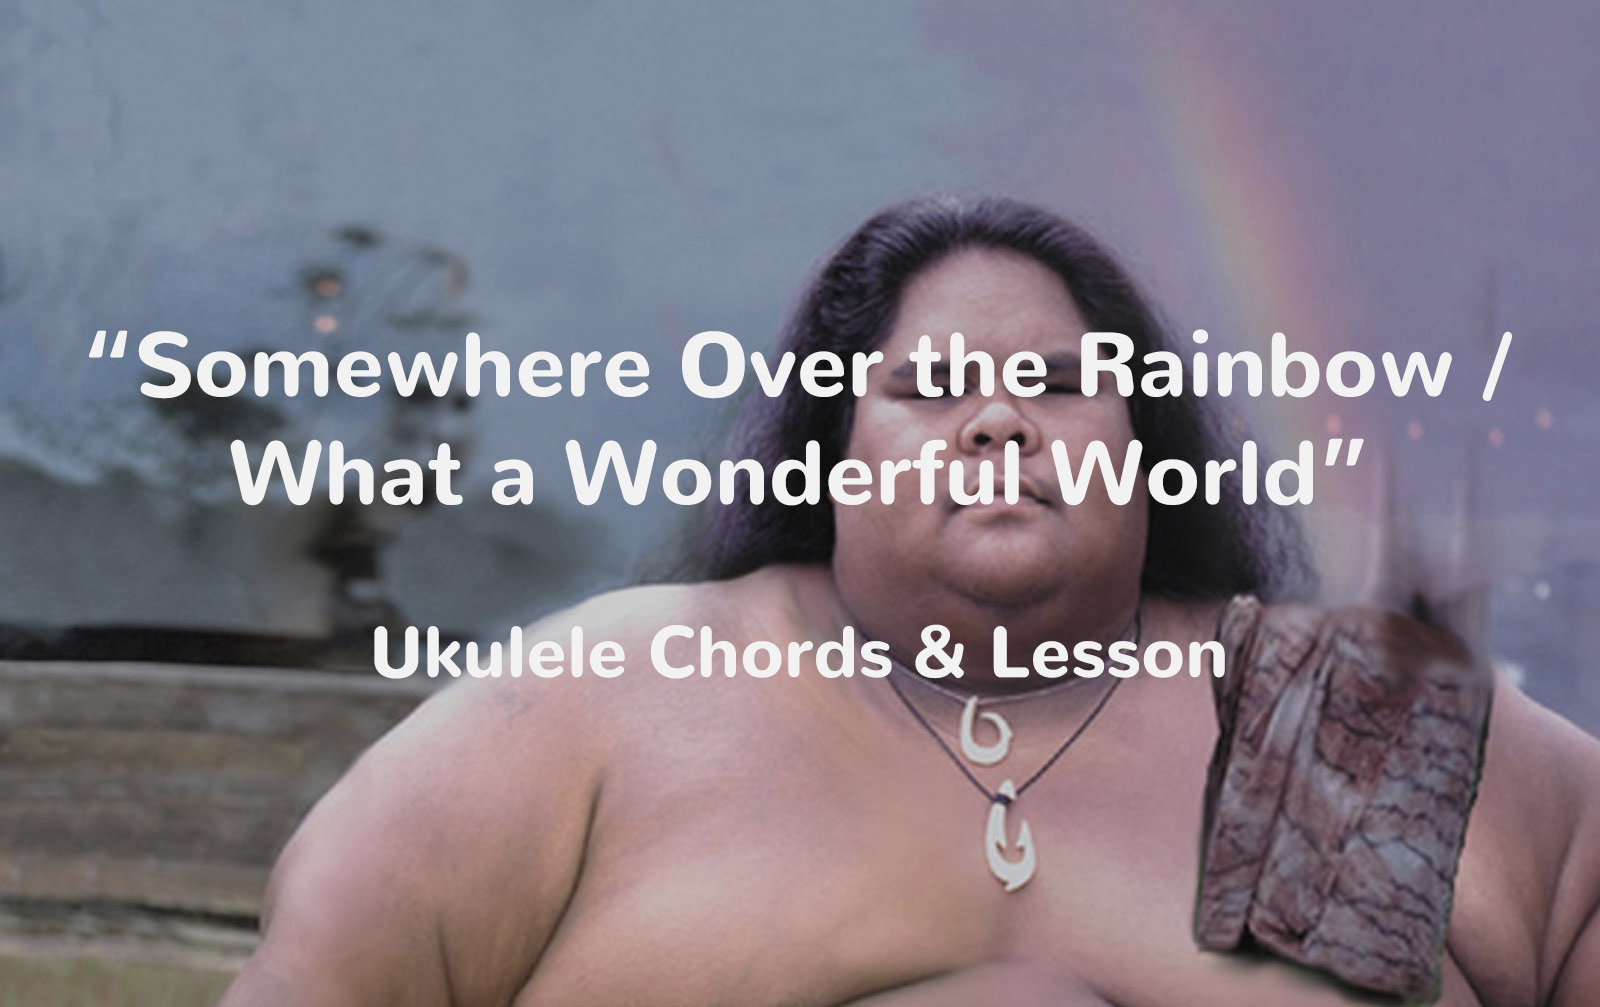 Somewhere Over The Rainbow Ukulele Chords Lesson Ukulele Tricks Recommended by the wall street journal. the rainbow ukulele chords lesson